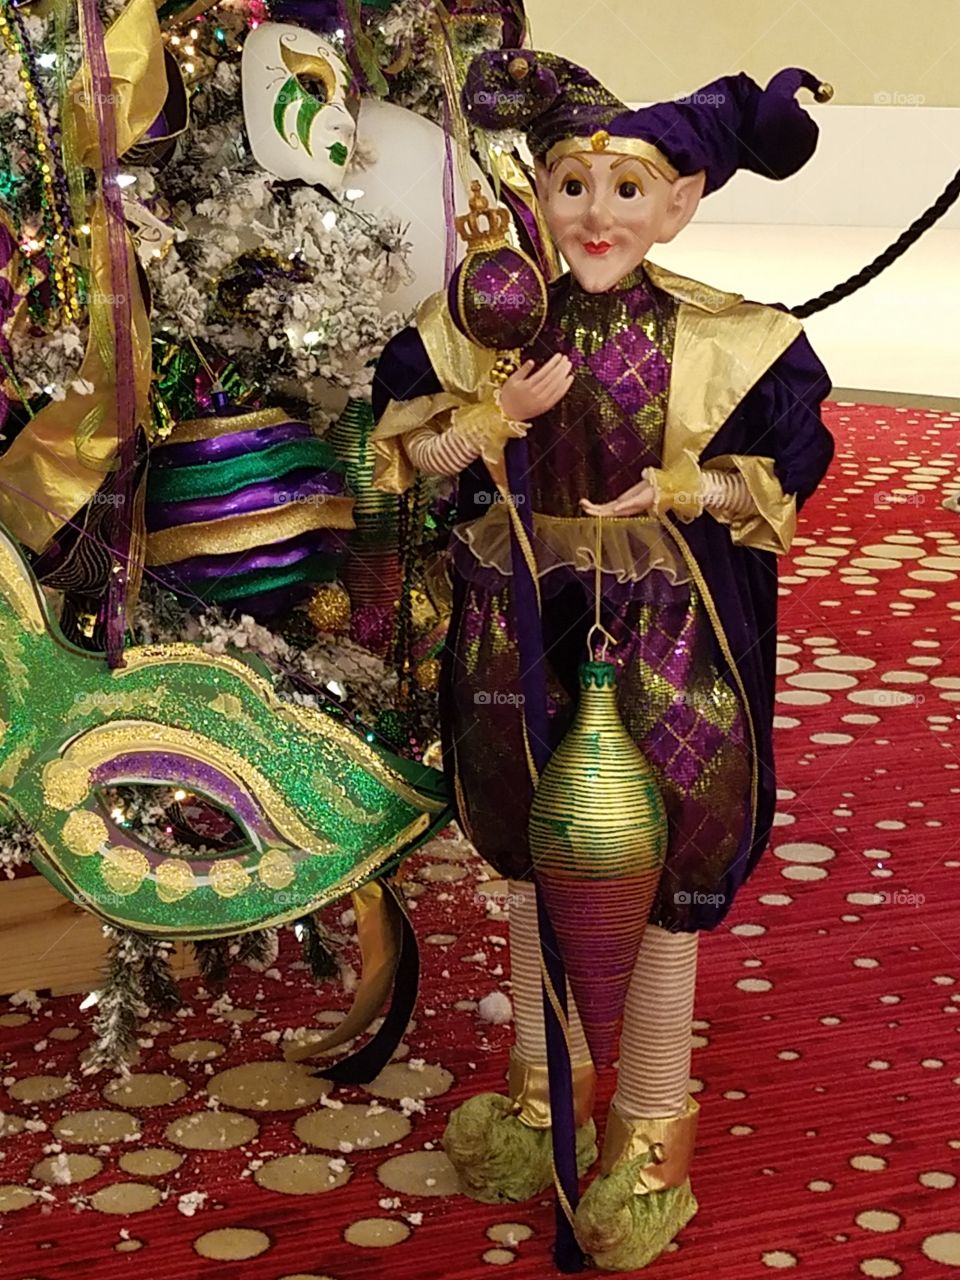 Purple, Mardi Gras Jester dressed in purple surrounded by purple Mardi Gras ornaments and mask